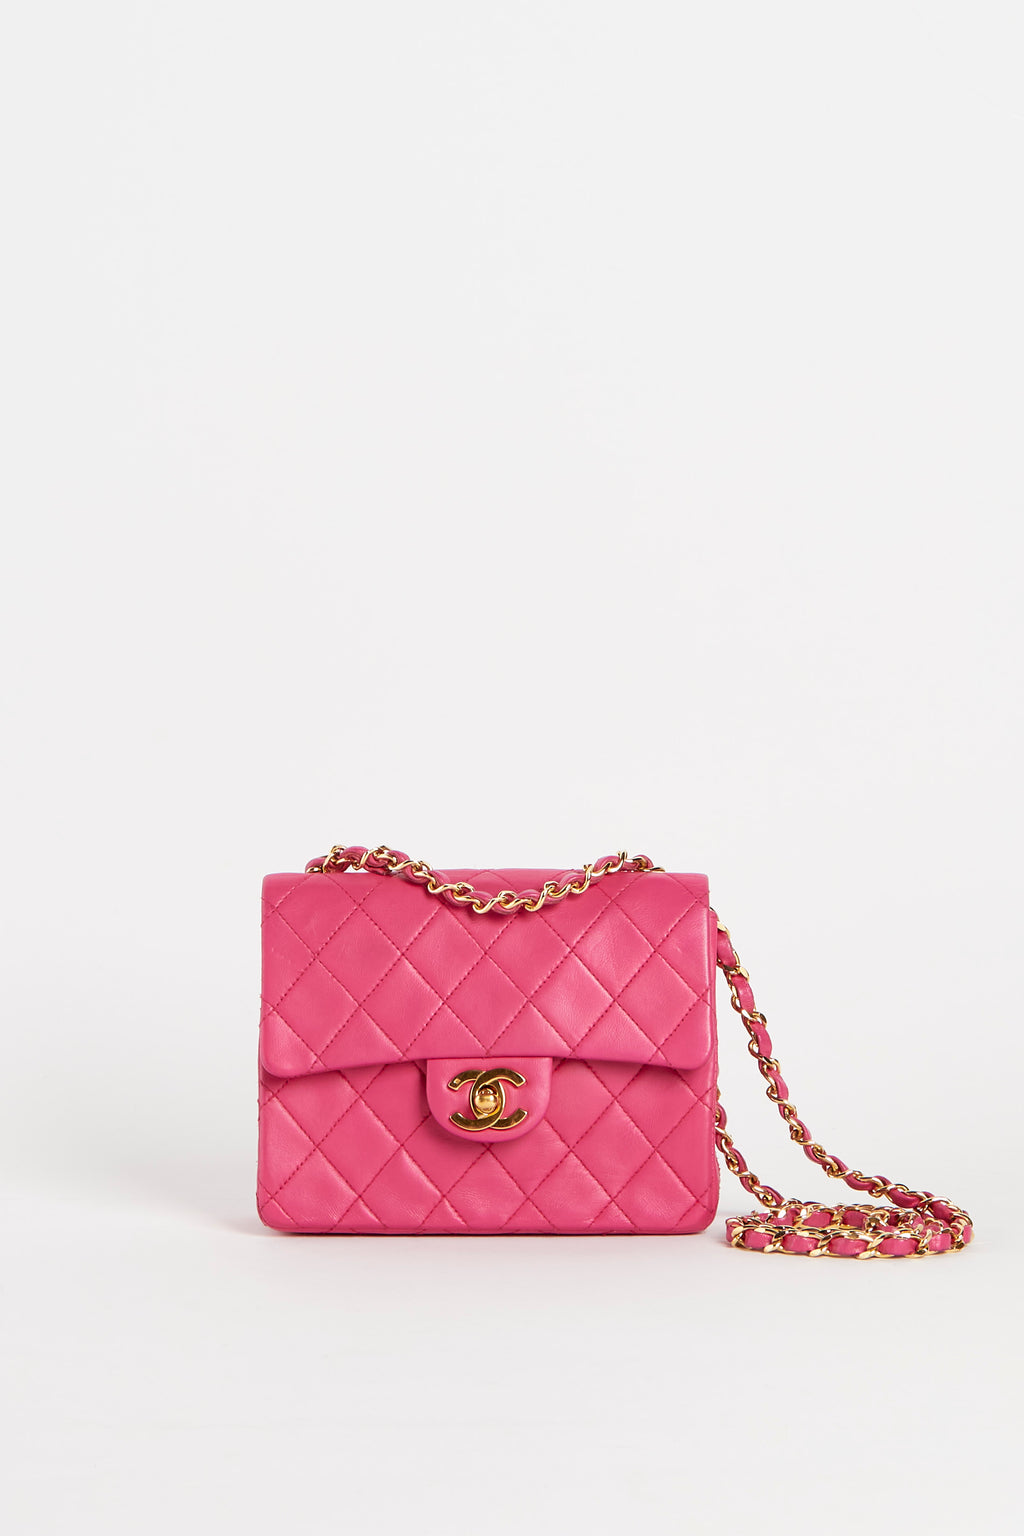 90s Chanel Hot Pink Lambskin Mini Square Bag with 24K GHW